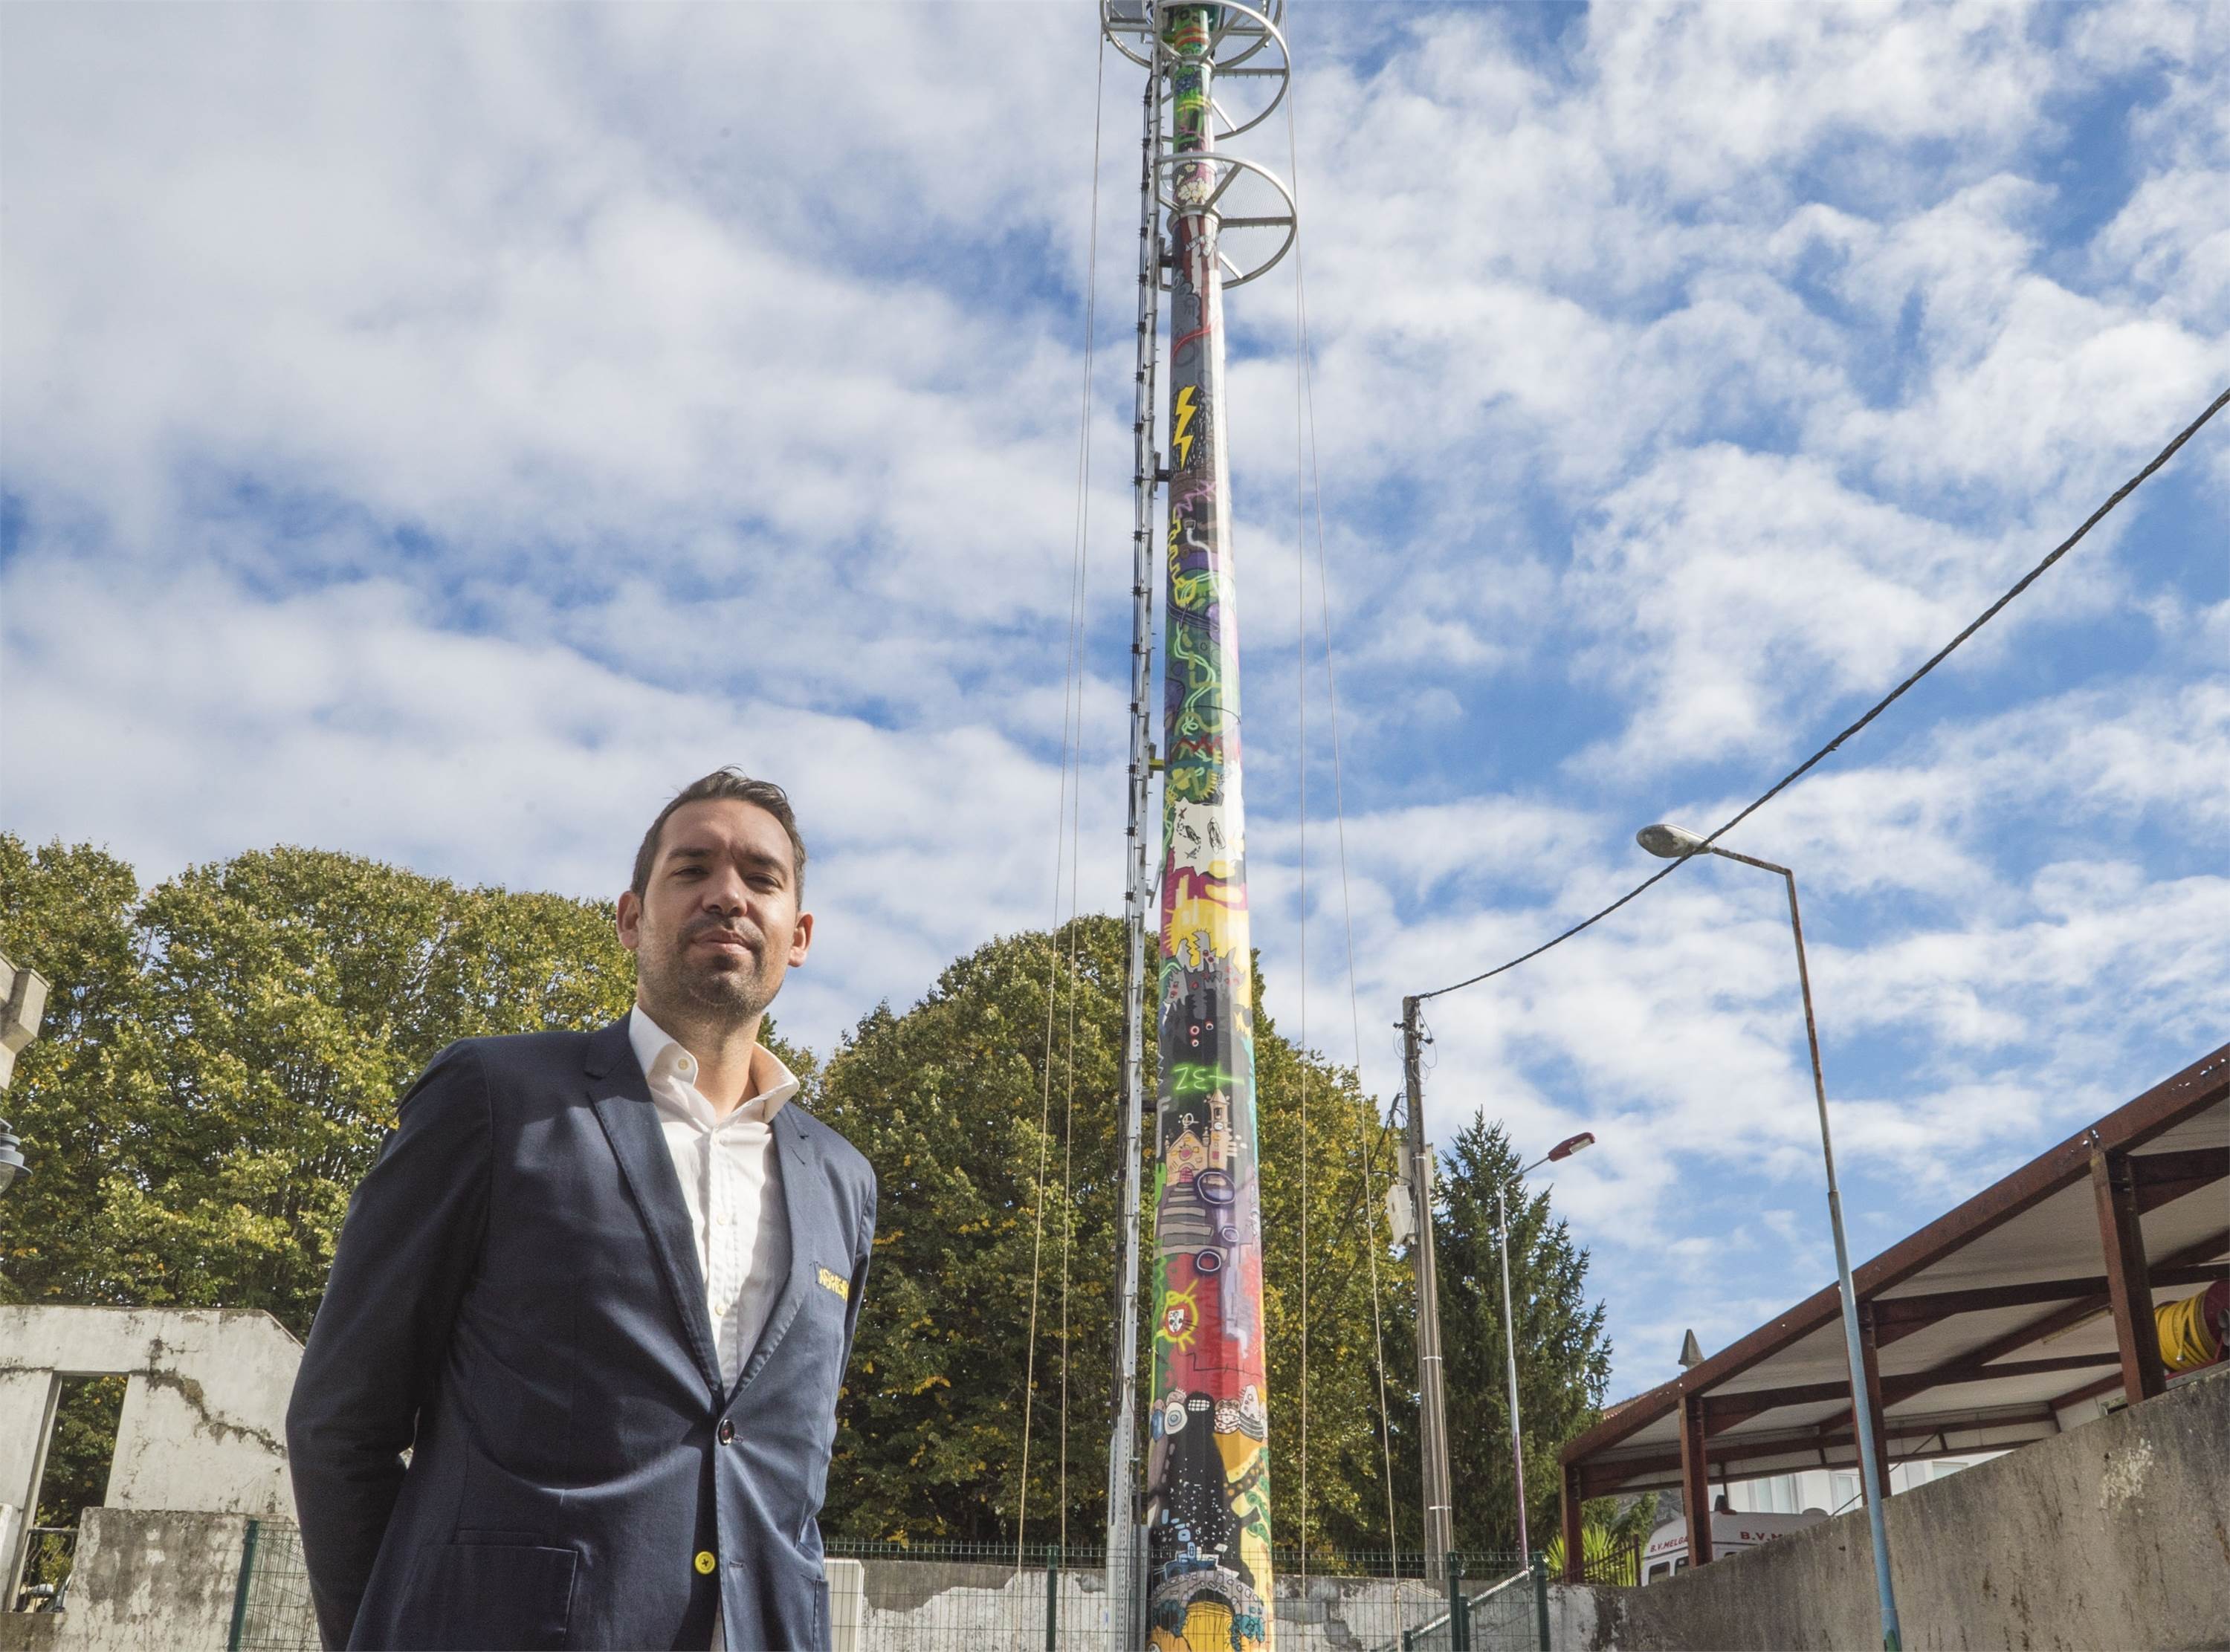 12.10.2020. Rafa López was in artistic residency in Melgaço where he developed a painting on an Altice Portugal telecommunications antenna of 20 meters high. The artist sought to include characteristic elements of the territory and its people in the antenna. 